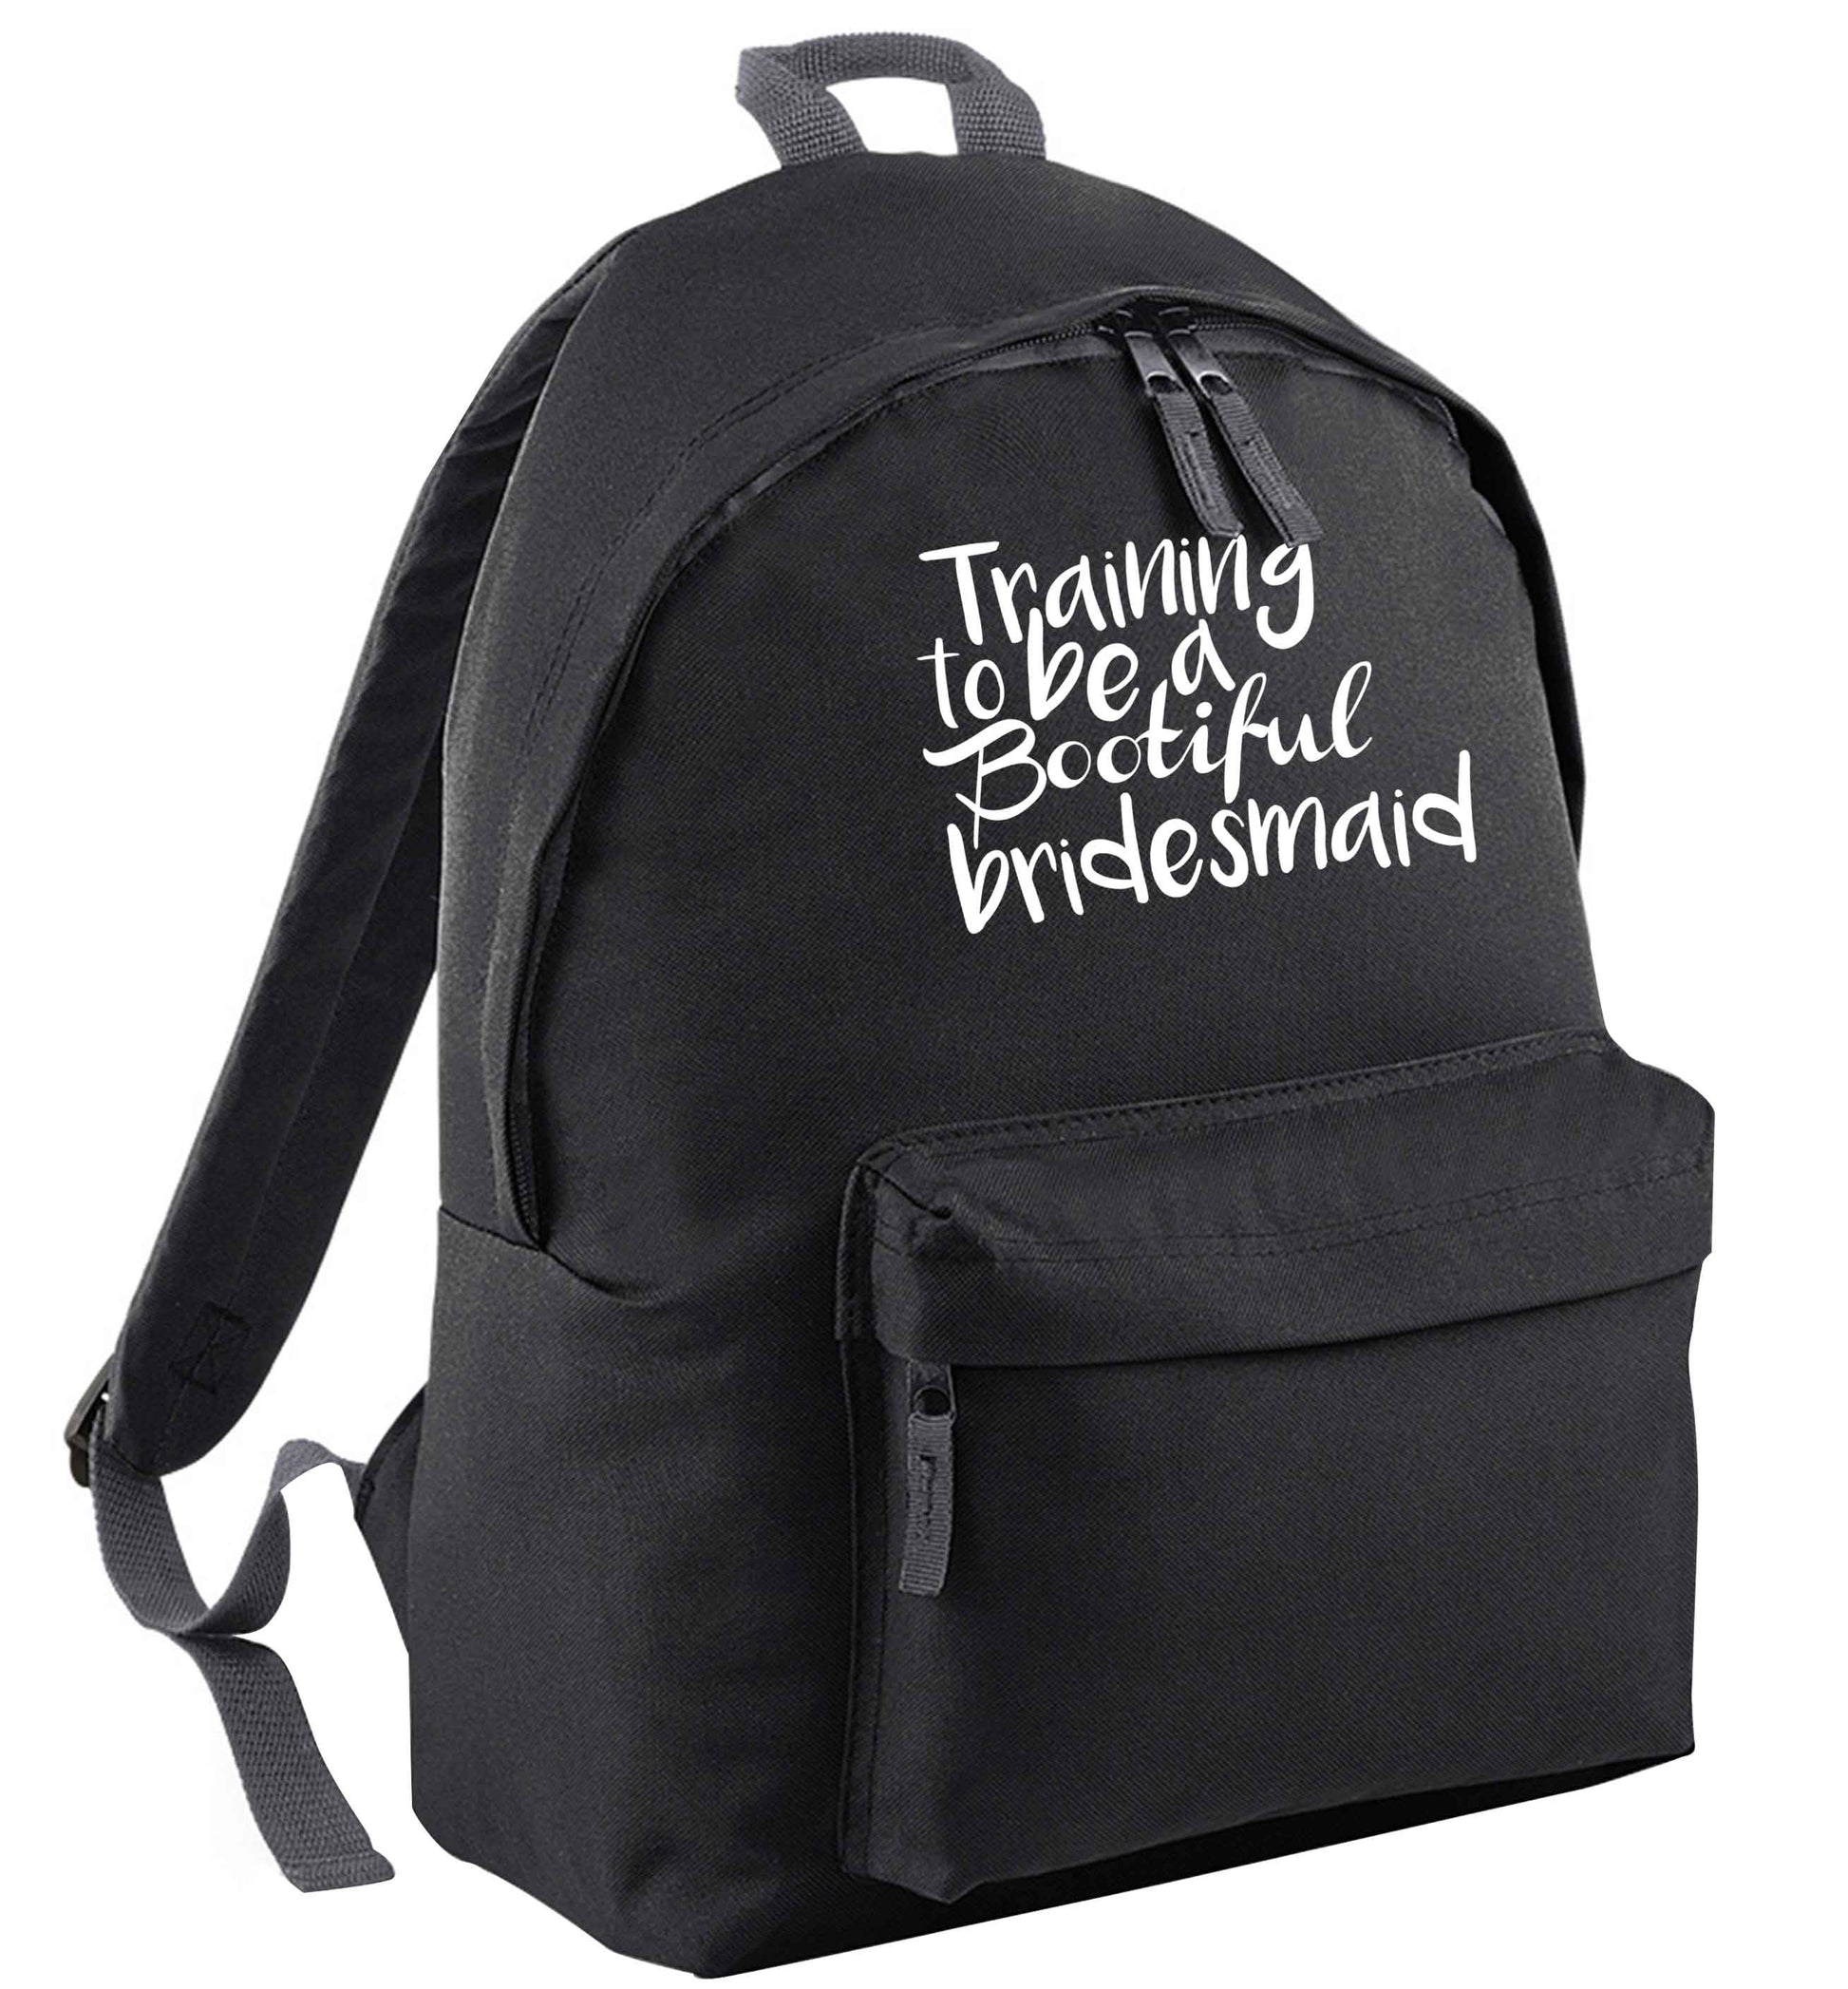 Get motivated and get fit for your big day! Our workout quotes and designs will get you ready to sweat! Perfect for any bride, groom or bridesmaid to be!  black adults backpack